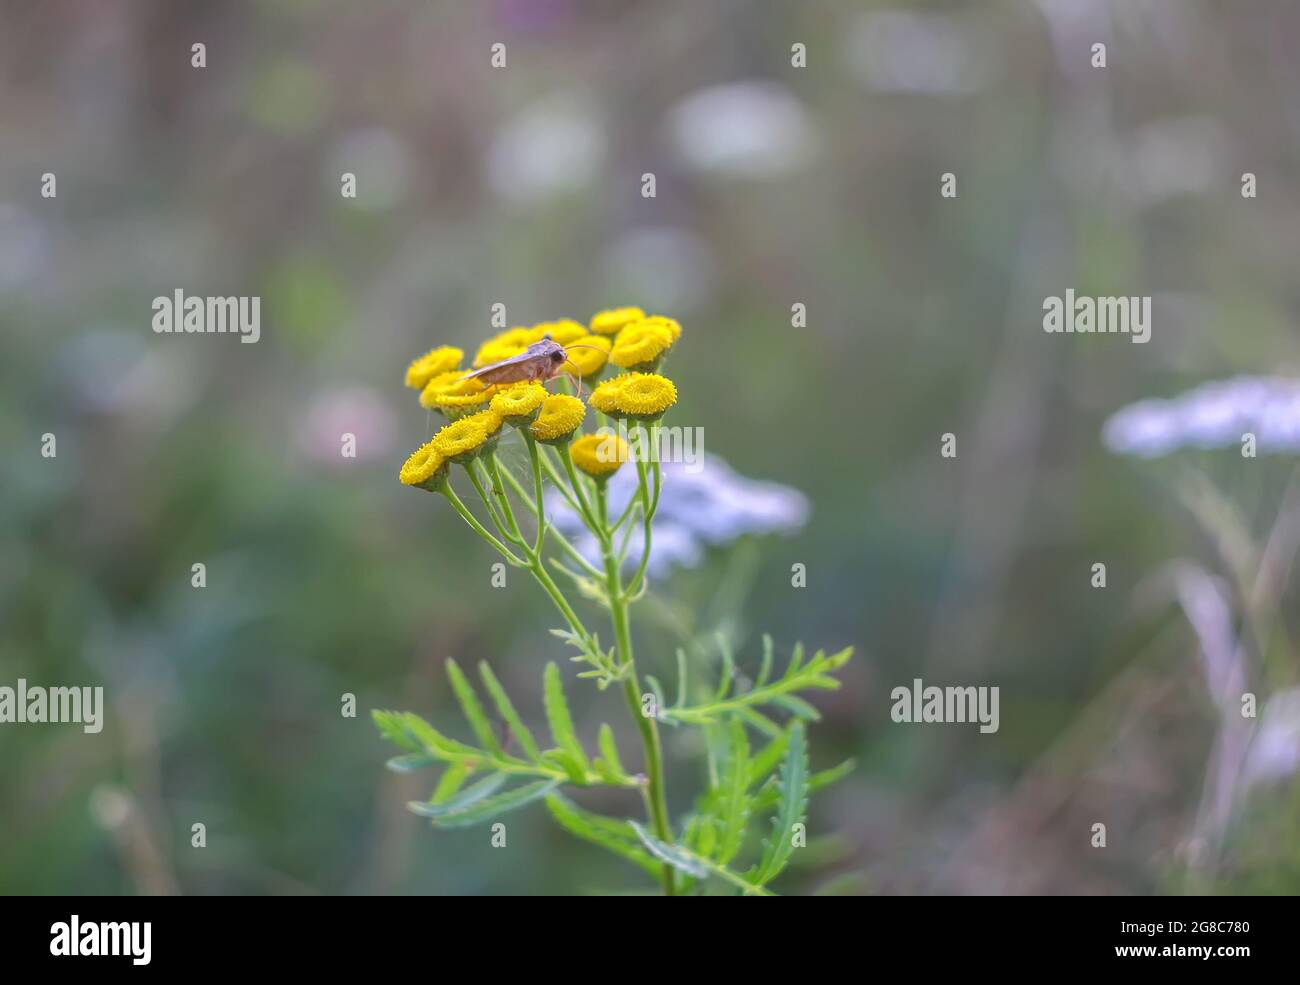 Medicinal flowering plant tansy or Tanacetum vulgare. Stock Photo